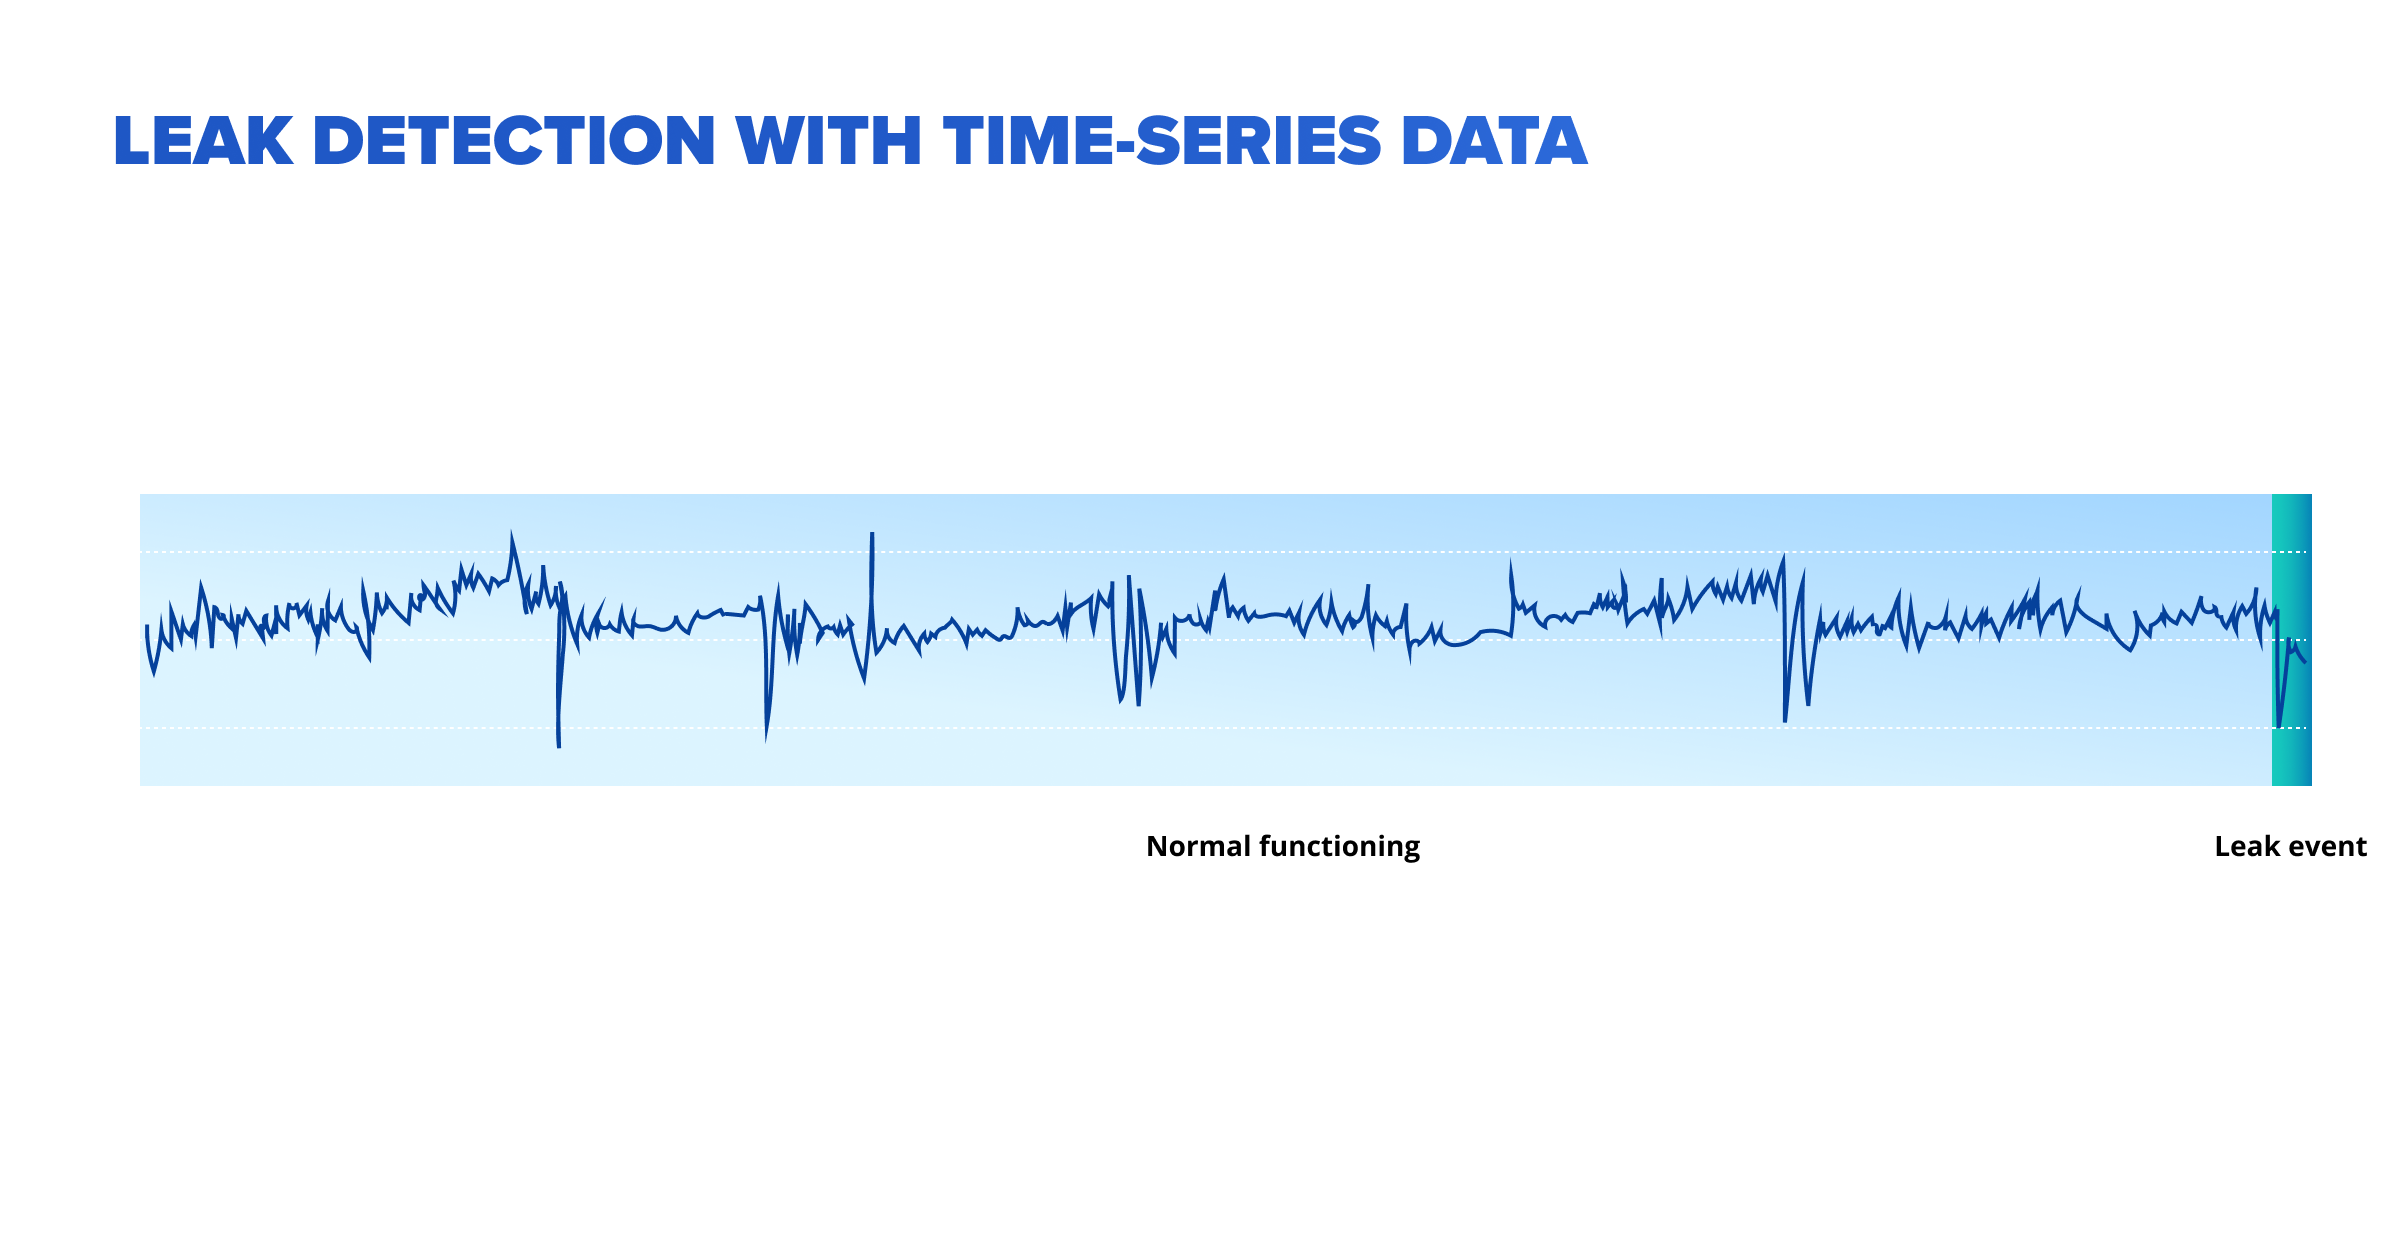 Leak detection with time-series data